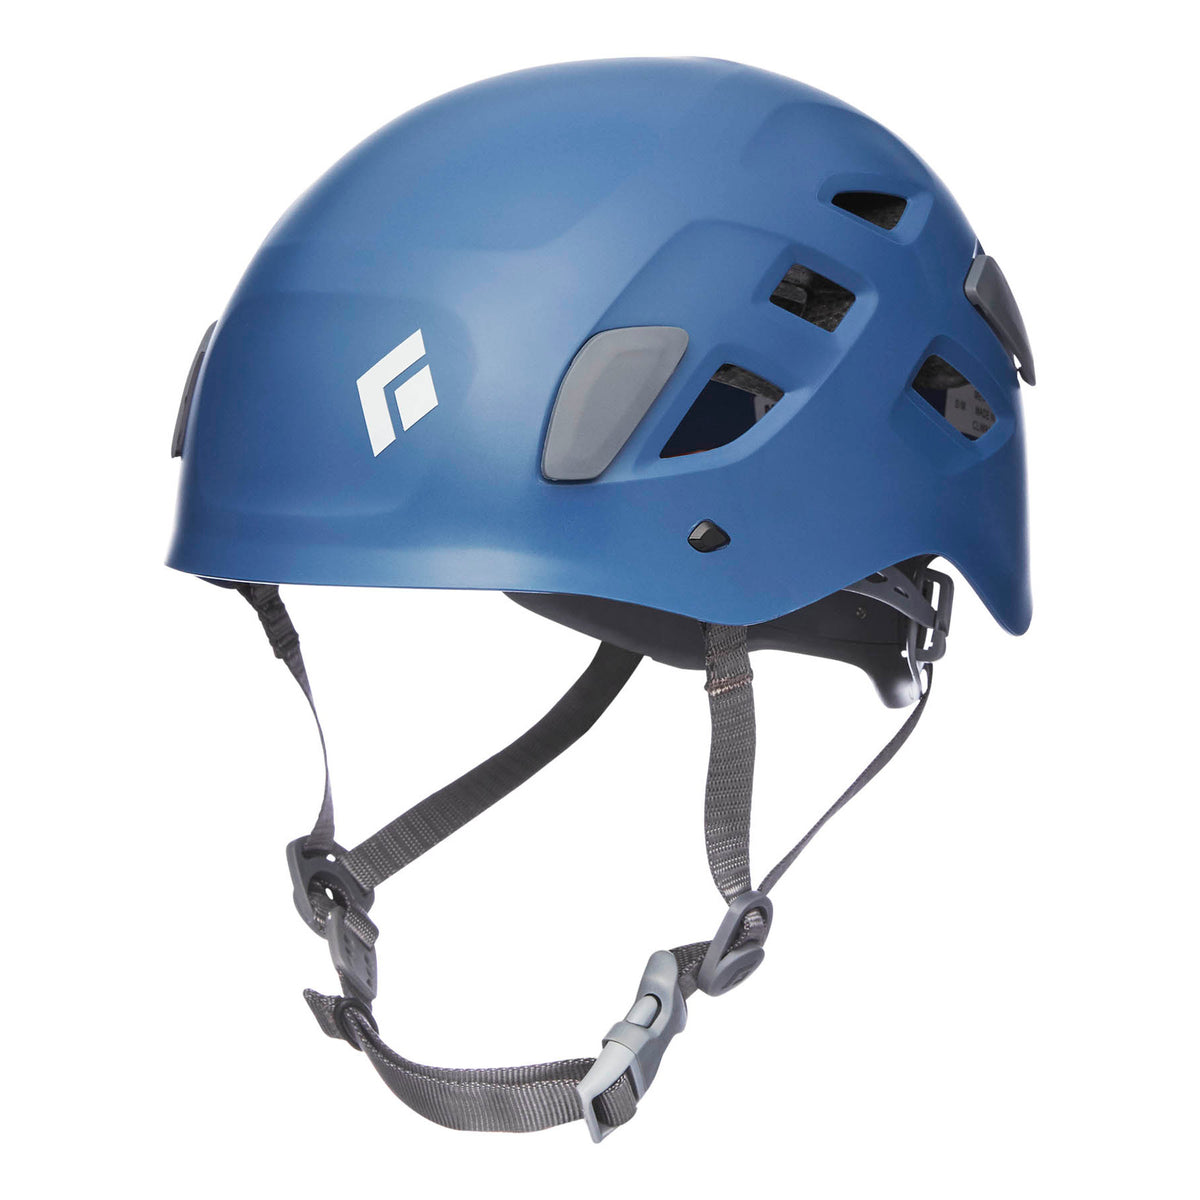 Black Diamond Half Dome climbing helmet, front/side view in blue colour with grey chin strap